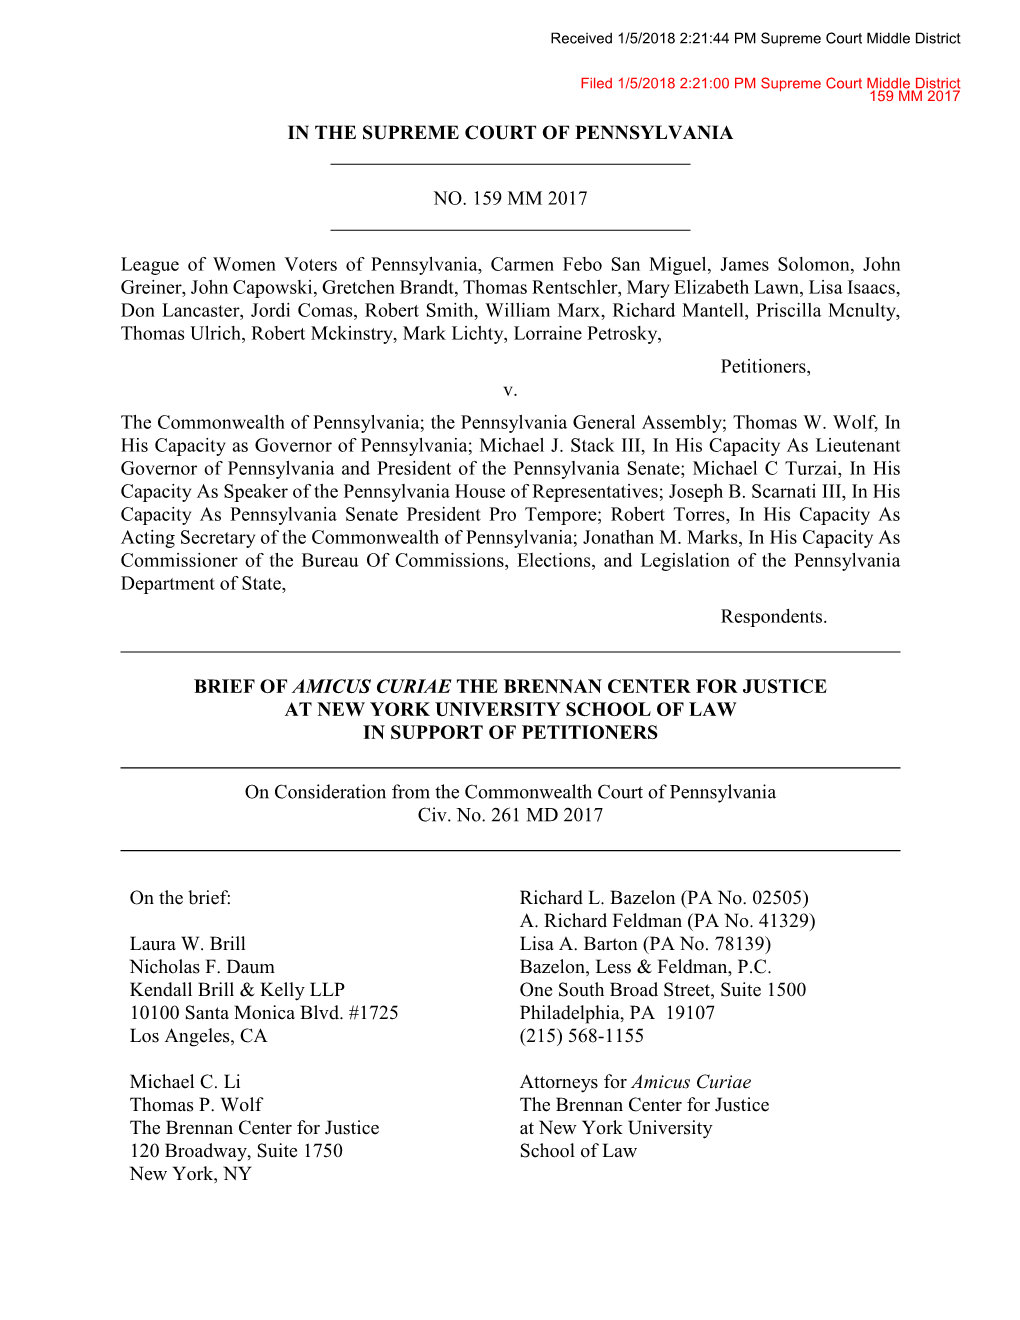 Amicus Brief of Brennan Center for Justice